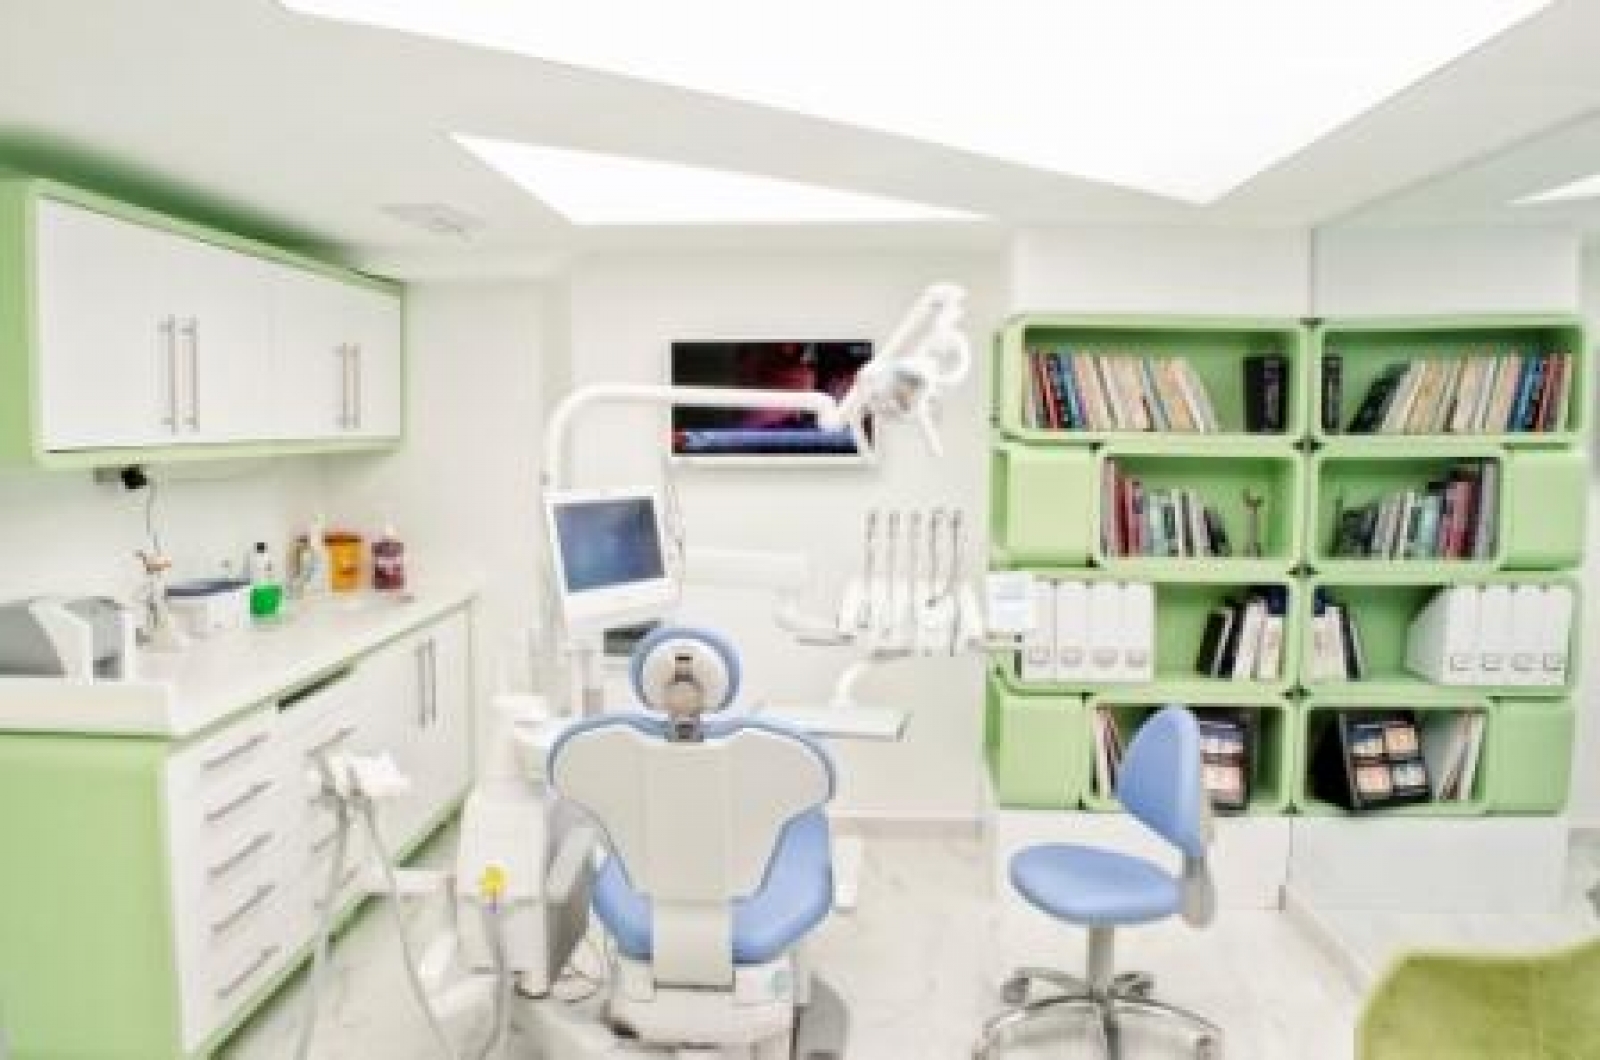 Oral and Dental Health